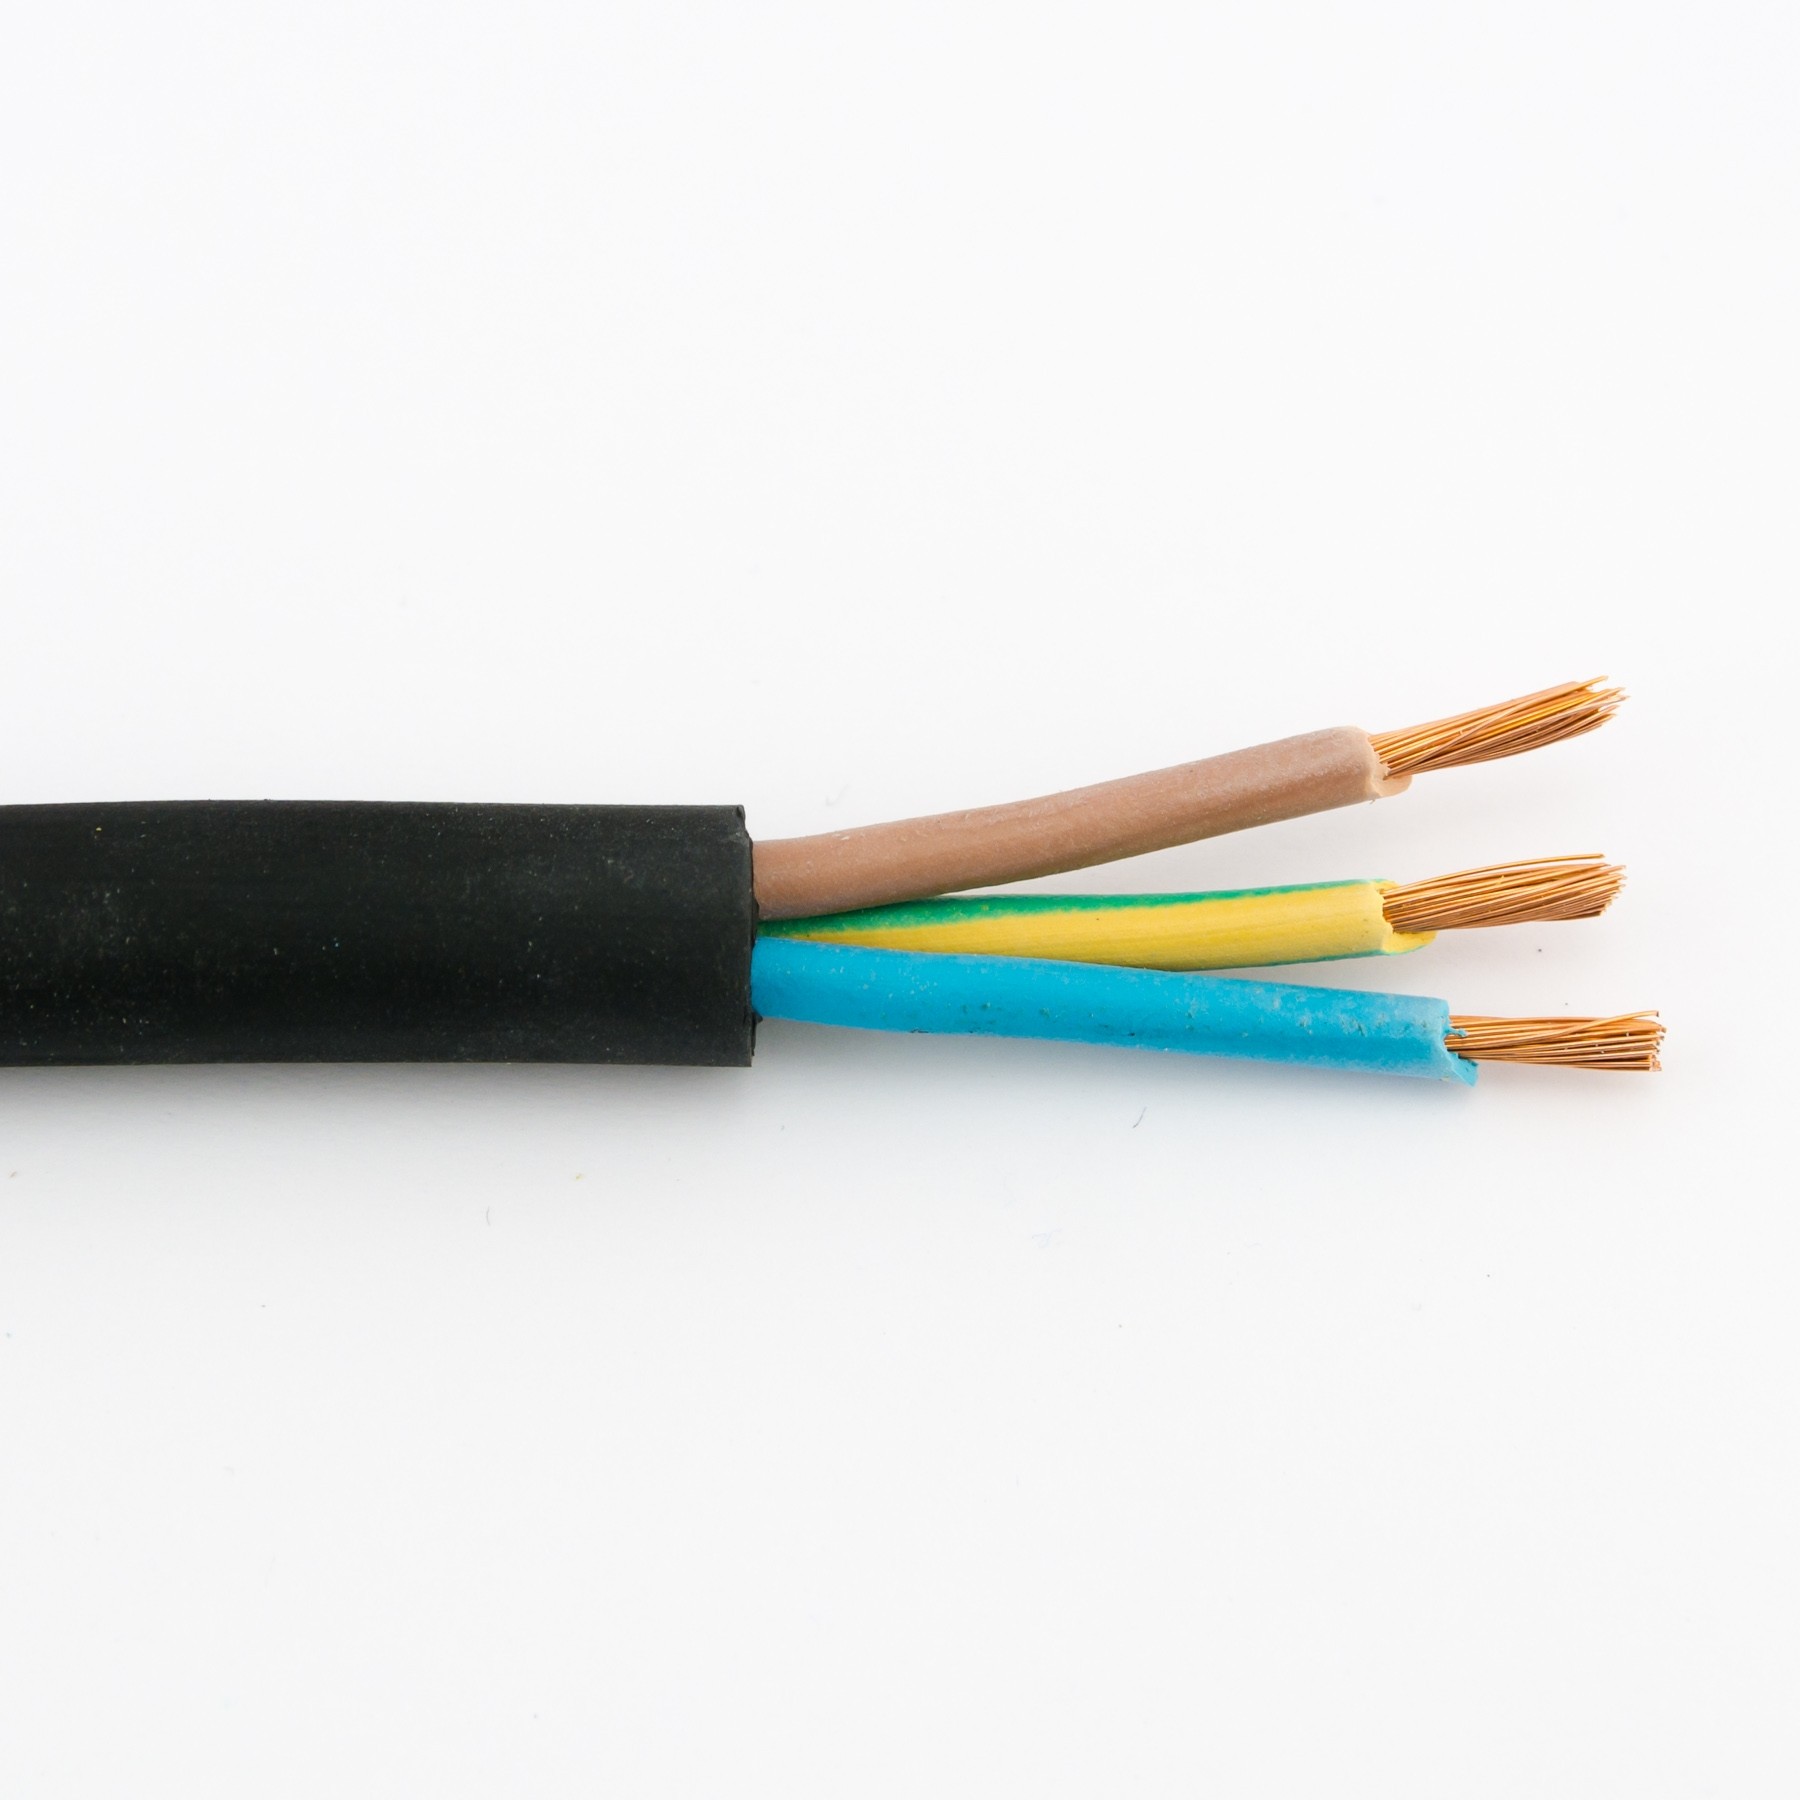 Competencia valores Coherente 3x2.5mm² neoprene cable for heating element